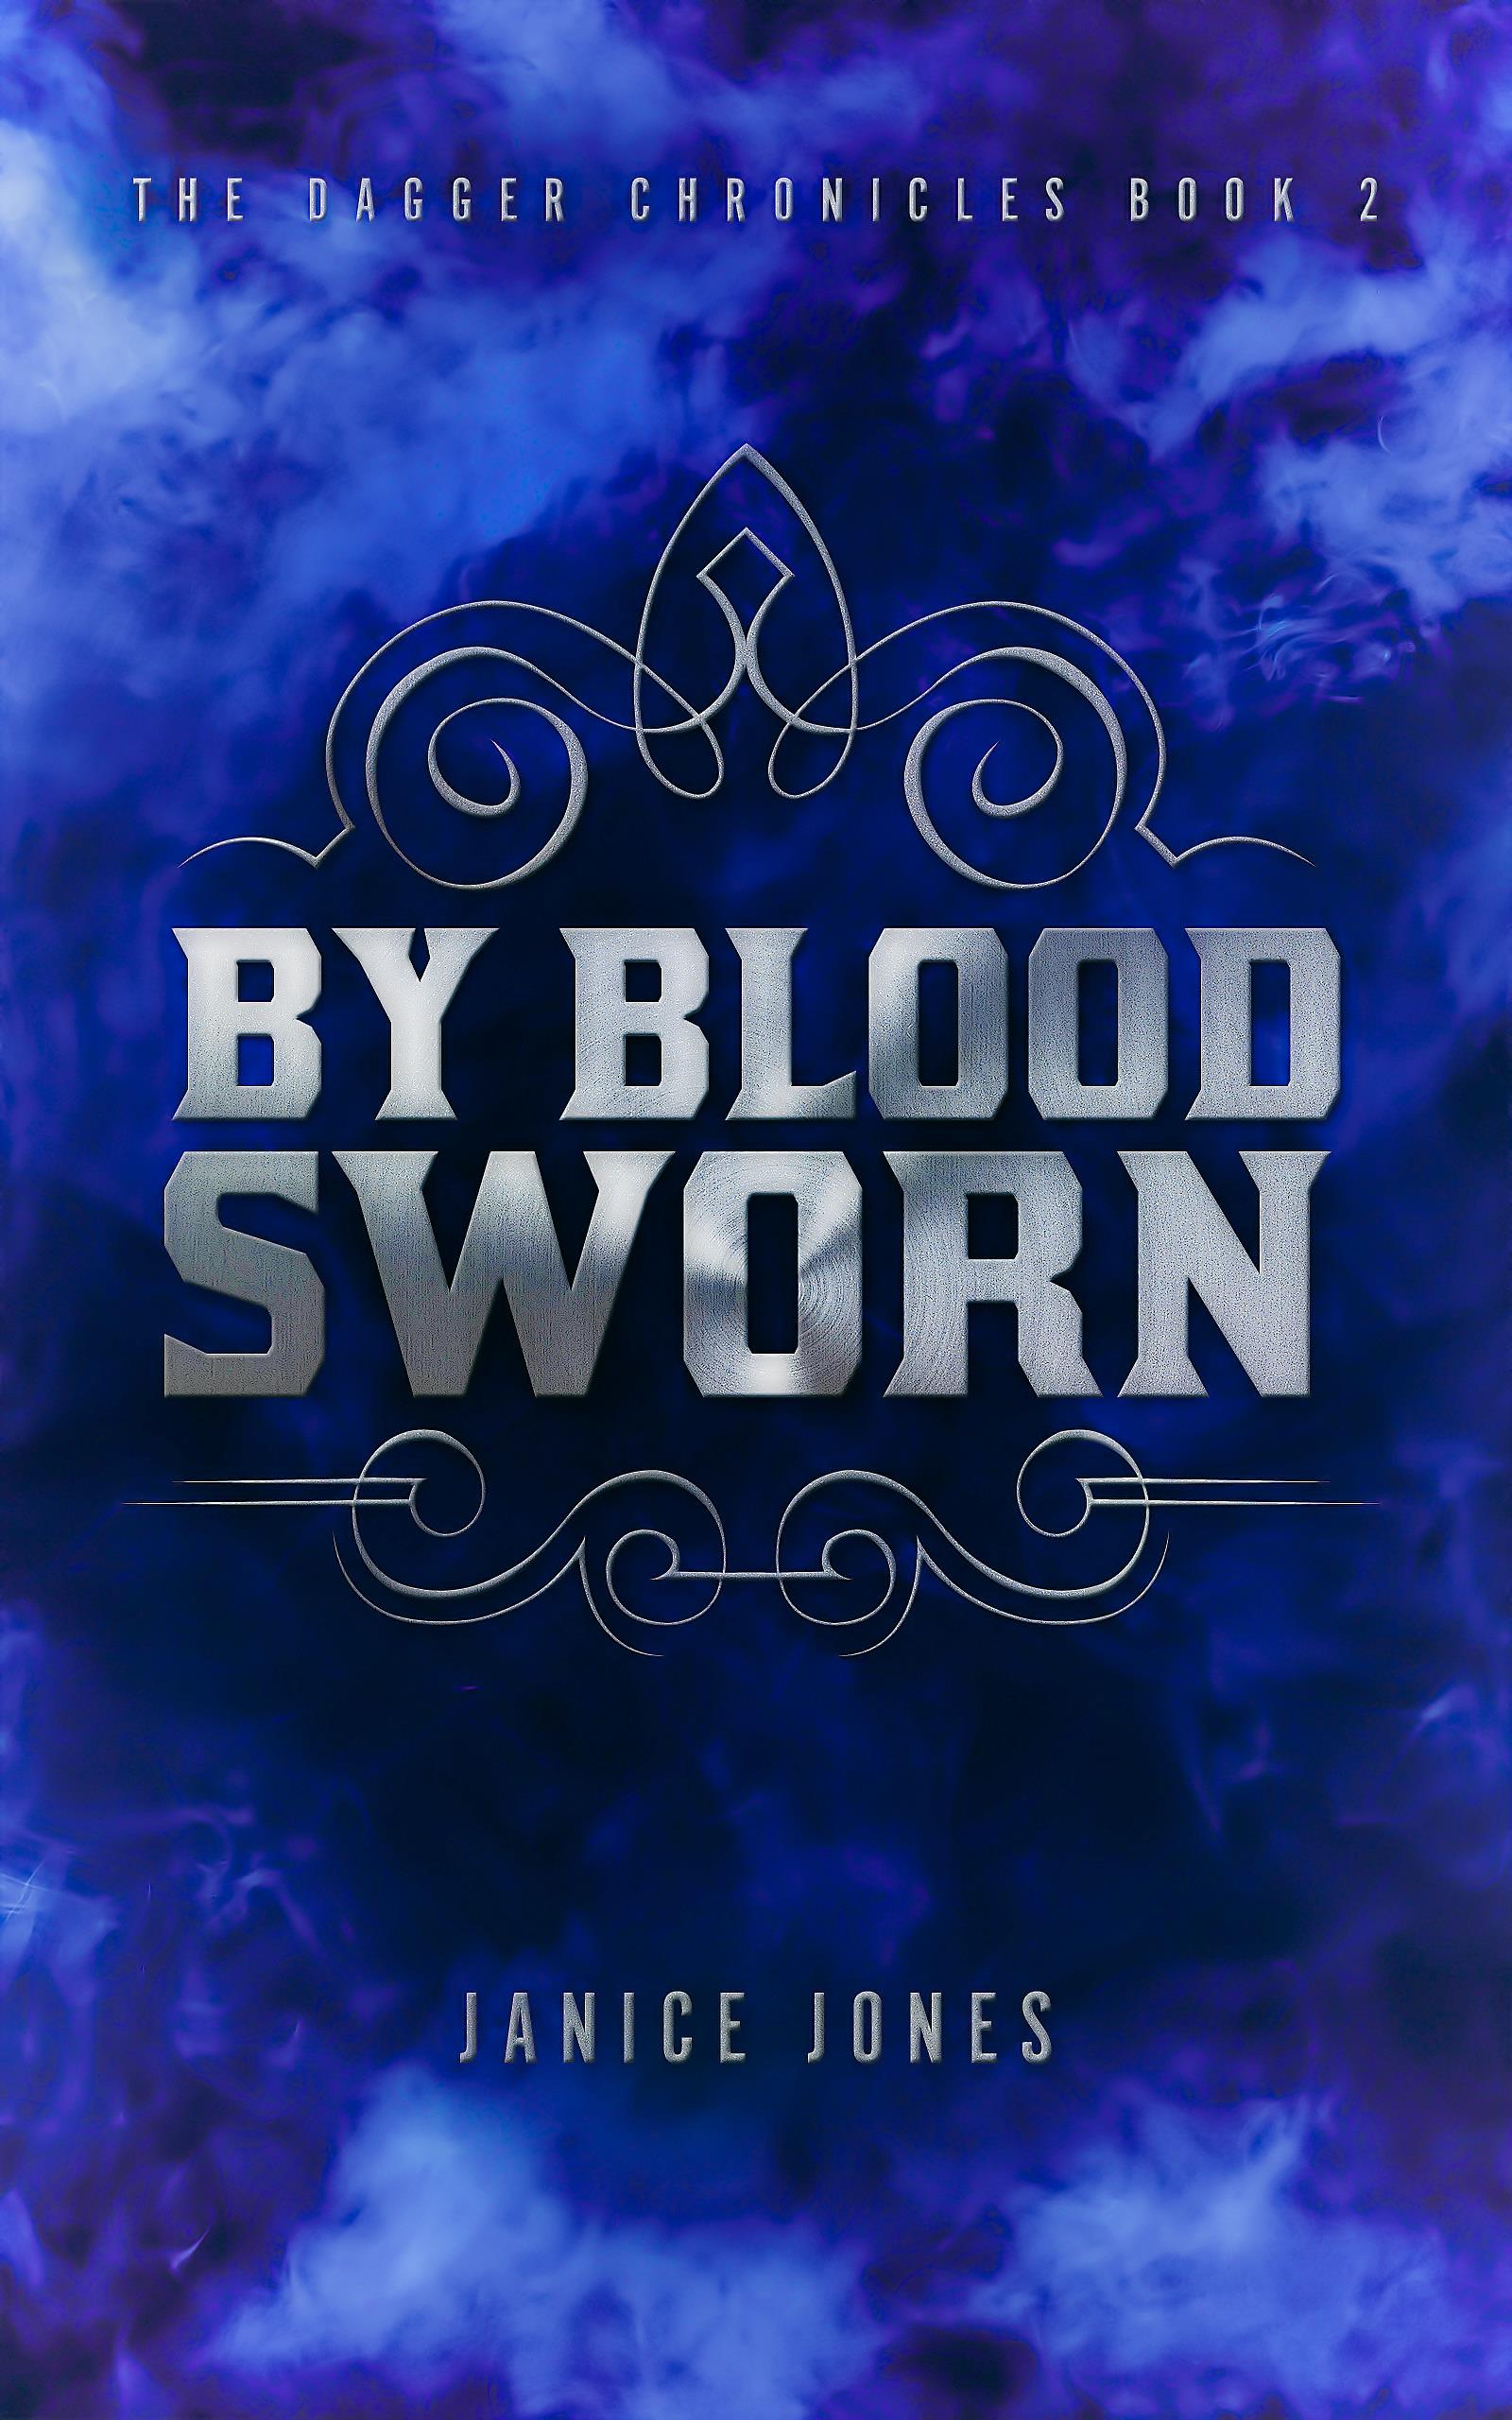 By Blood Sworn: The Dagger Chronicles Book 2